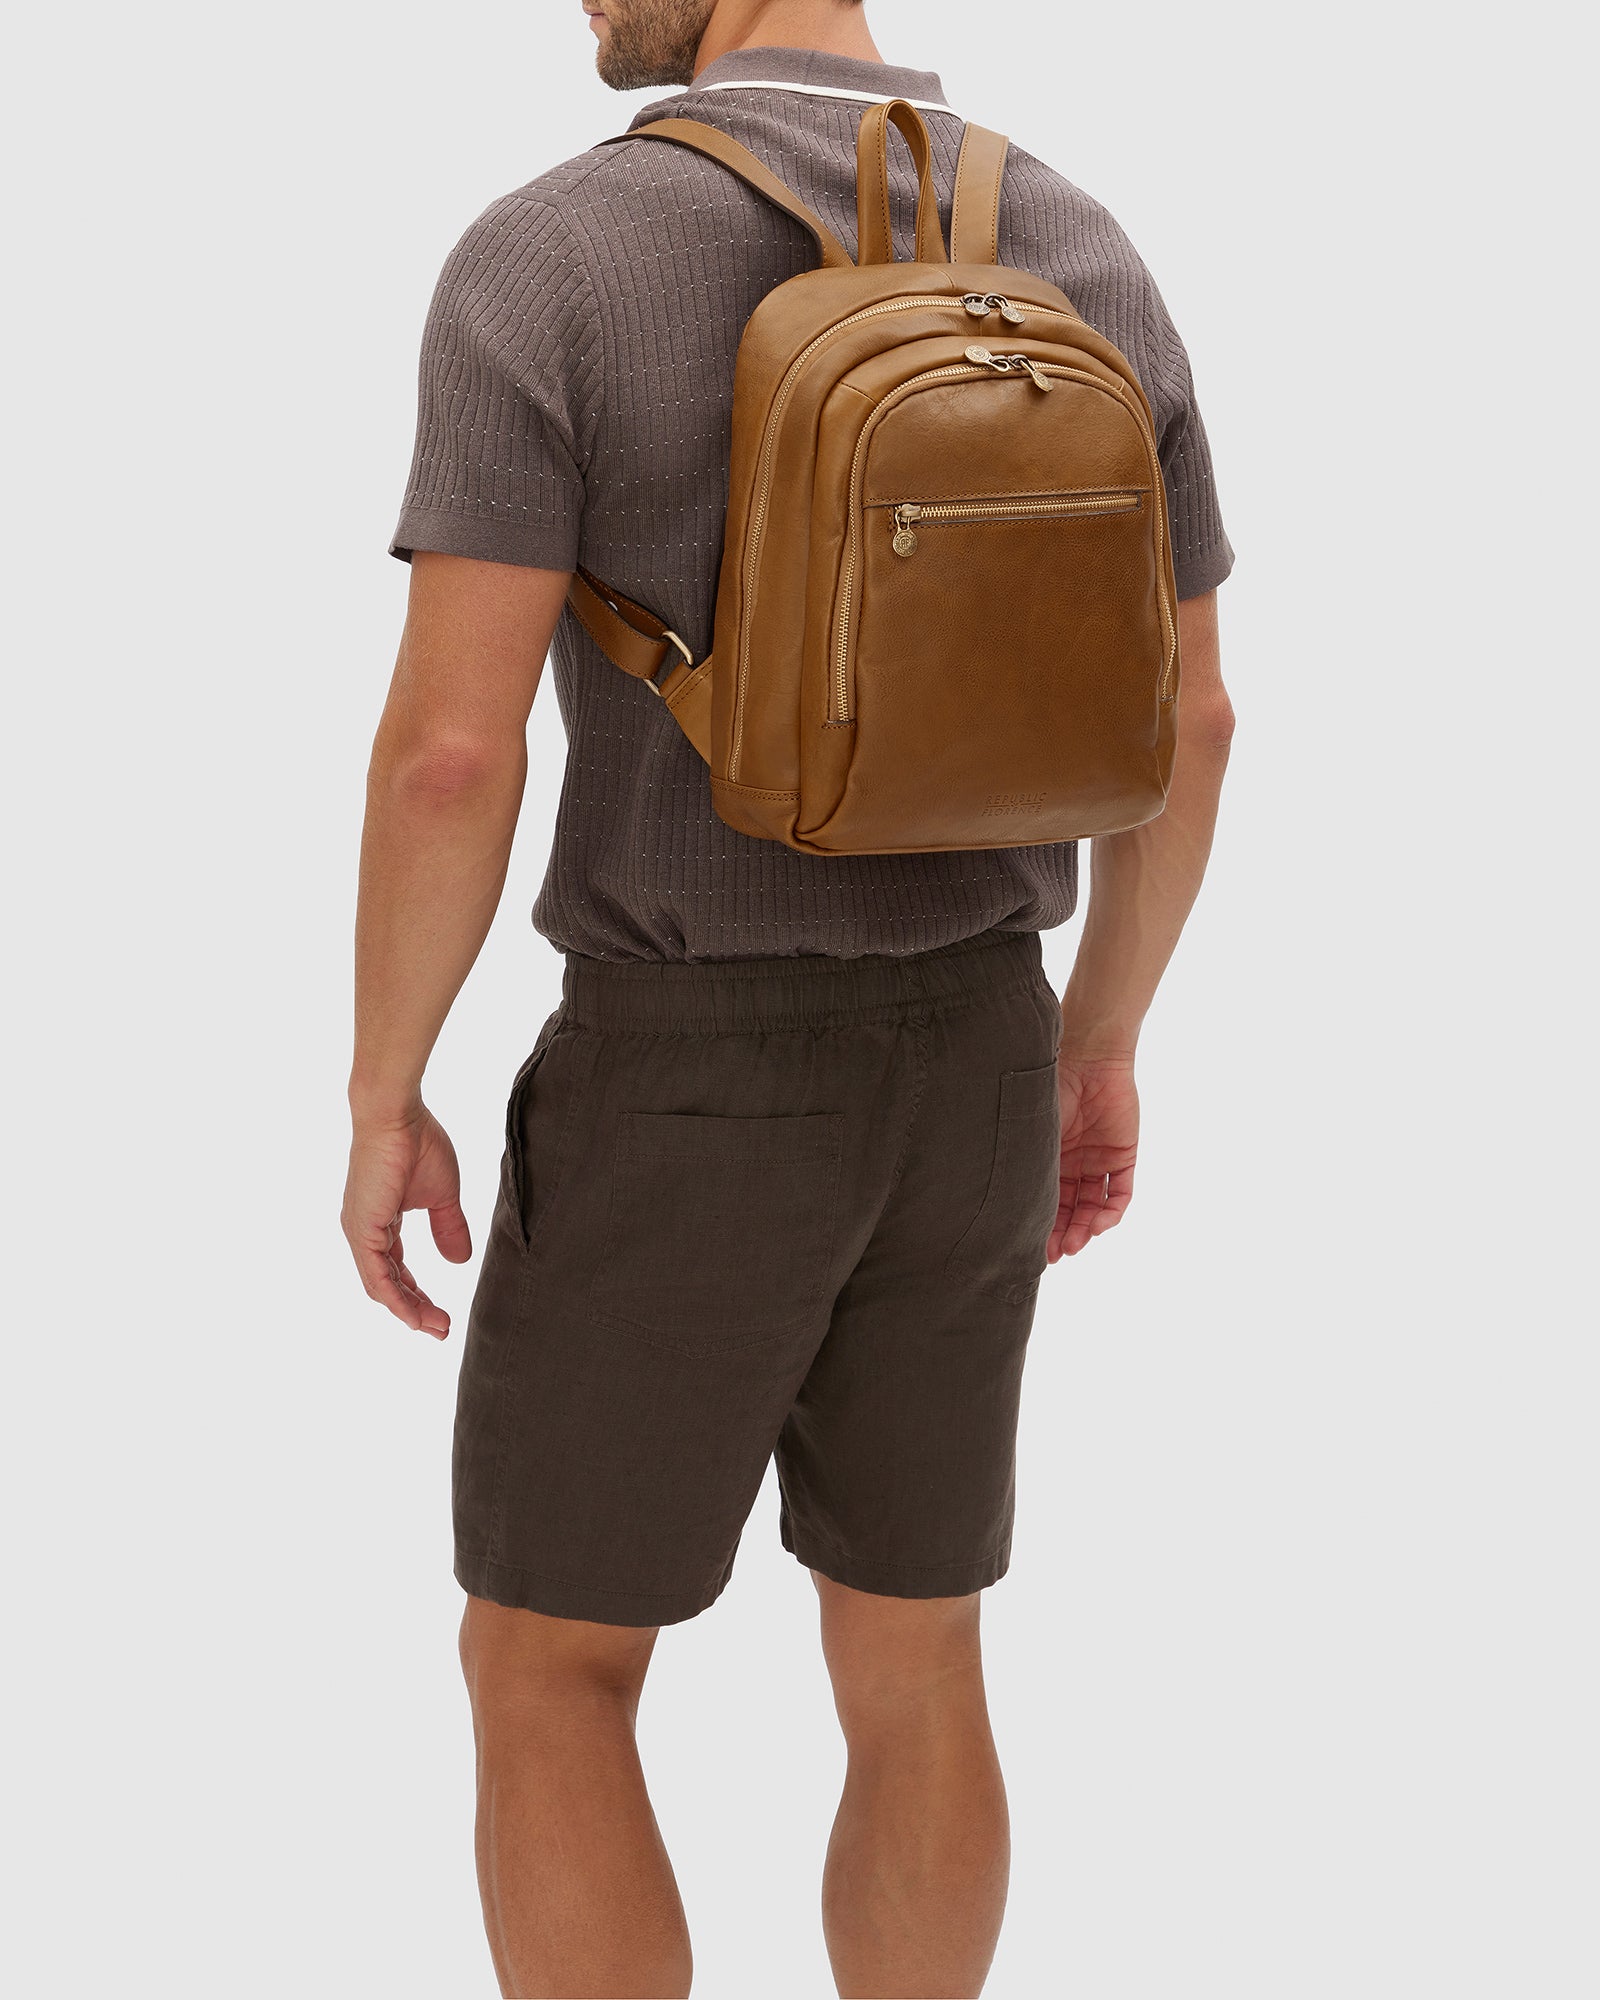 Archy Tan - Leather Backpack 13" laptop